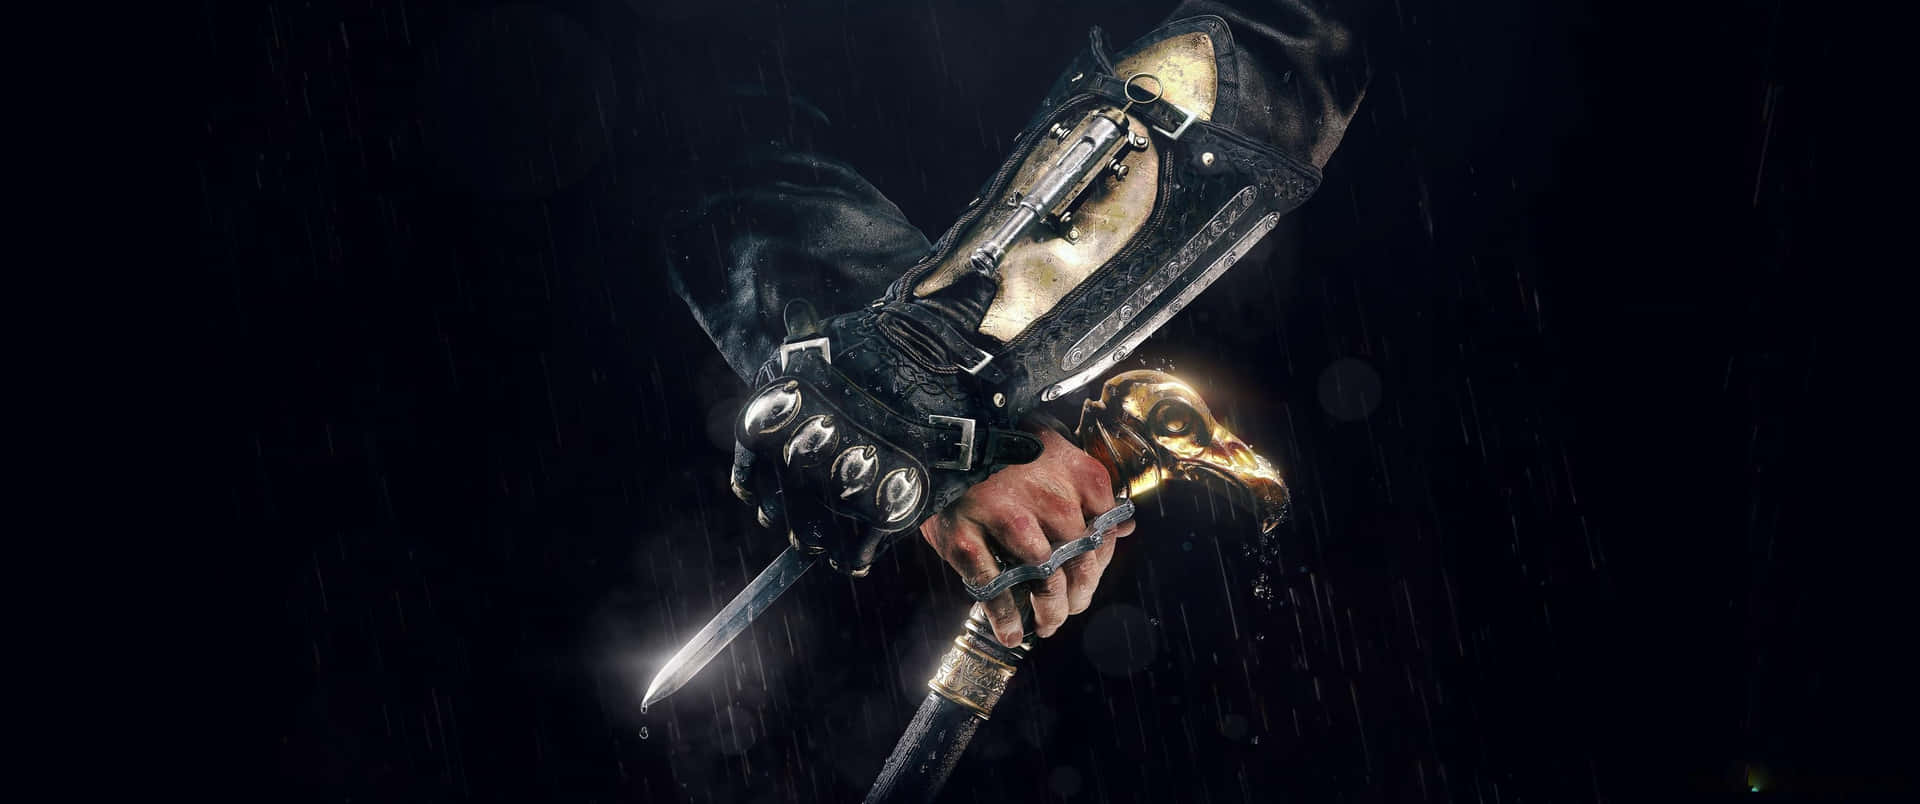 3440x1440p Assassin's Creed Odyssey Background Hidden Blade And A Cane